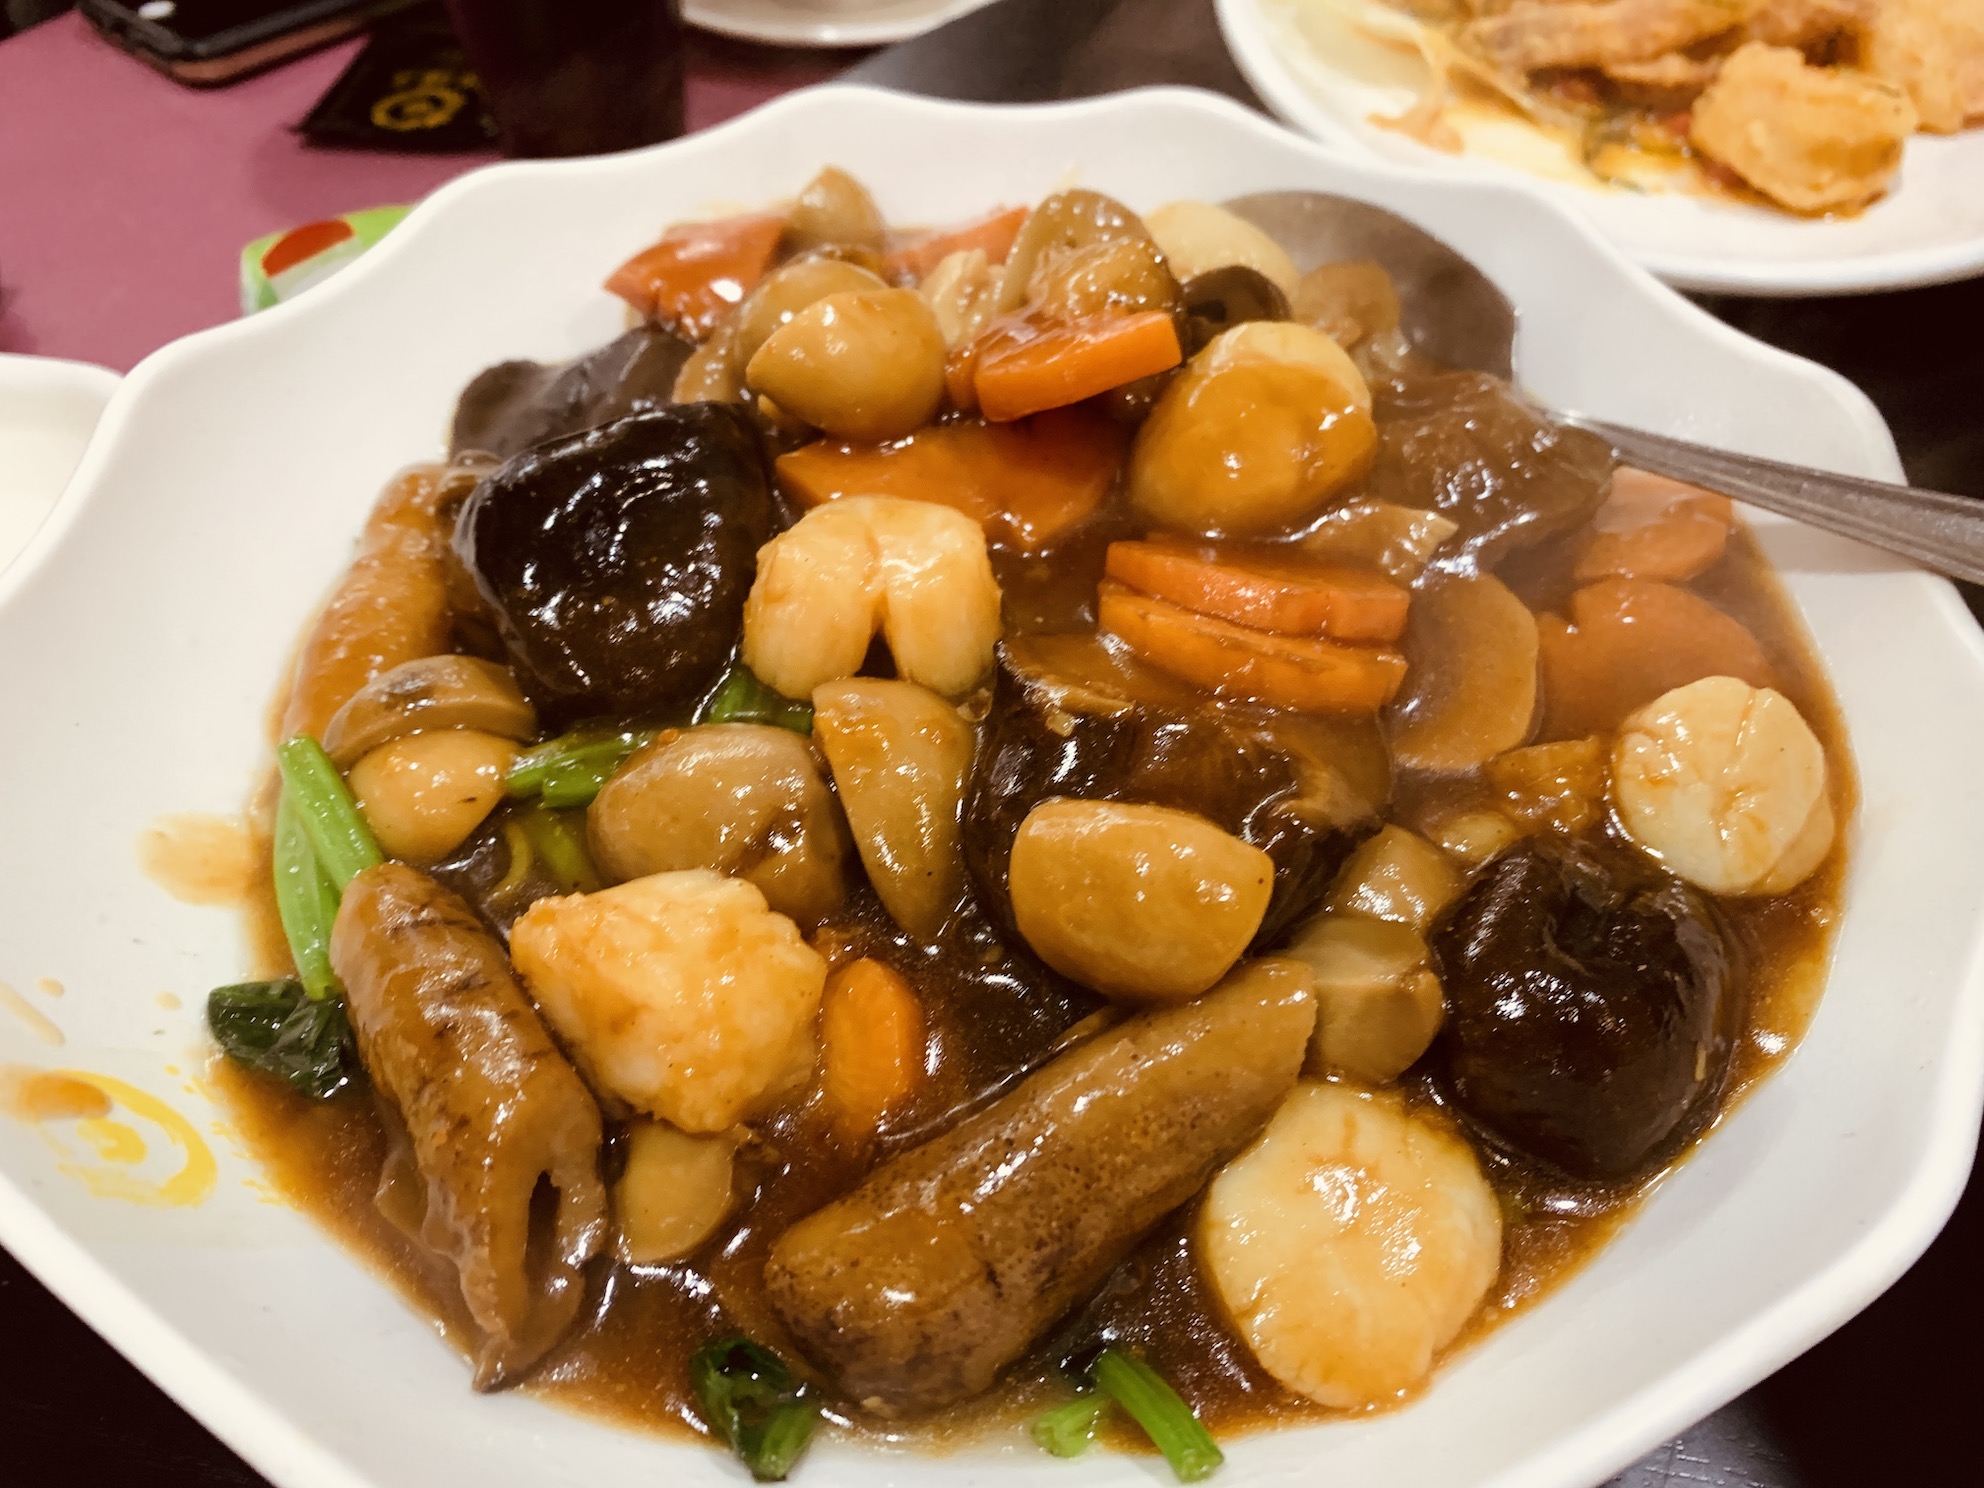 Whampoa Keng Food Street Steamboat Restaurant - Mushroom, Sea Cucumber & Scallops with Spinach